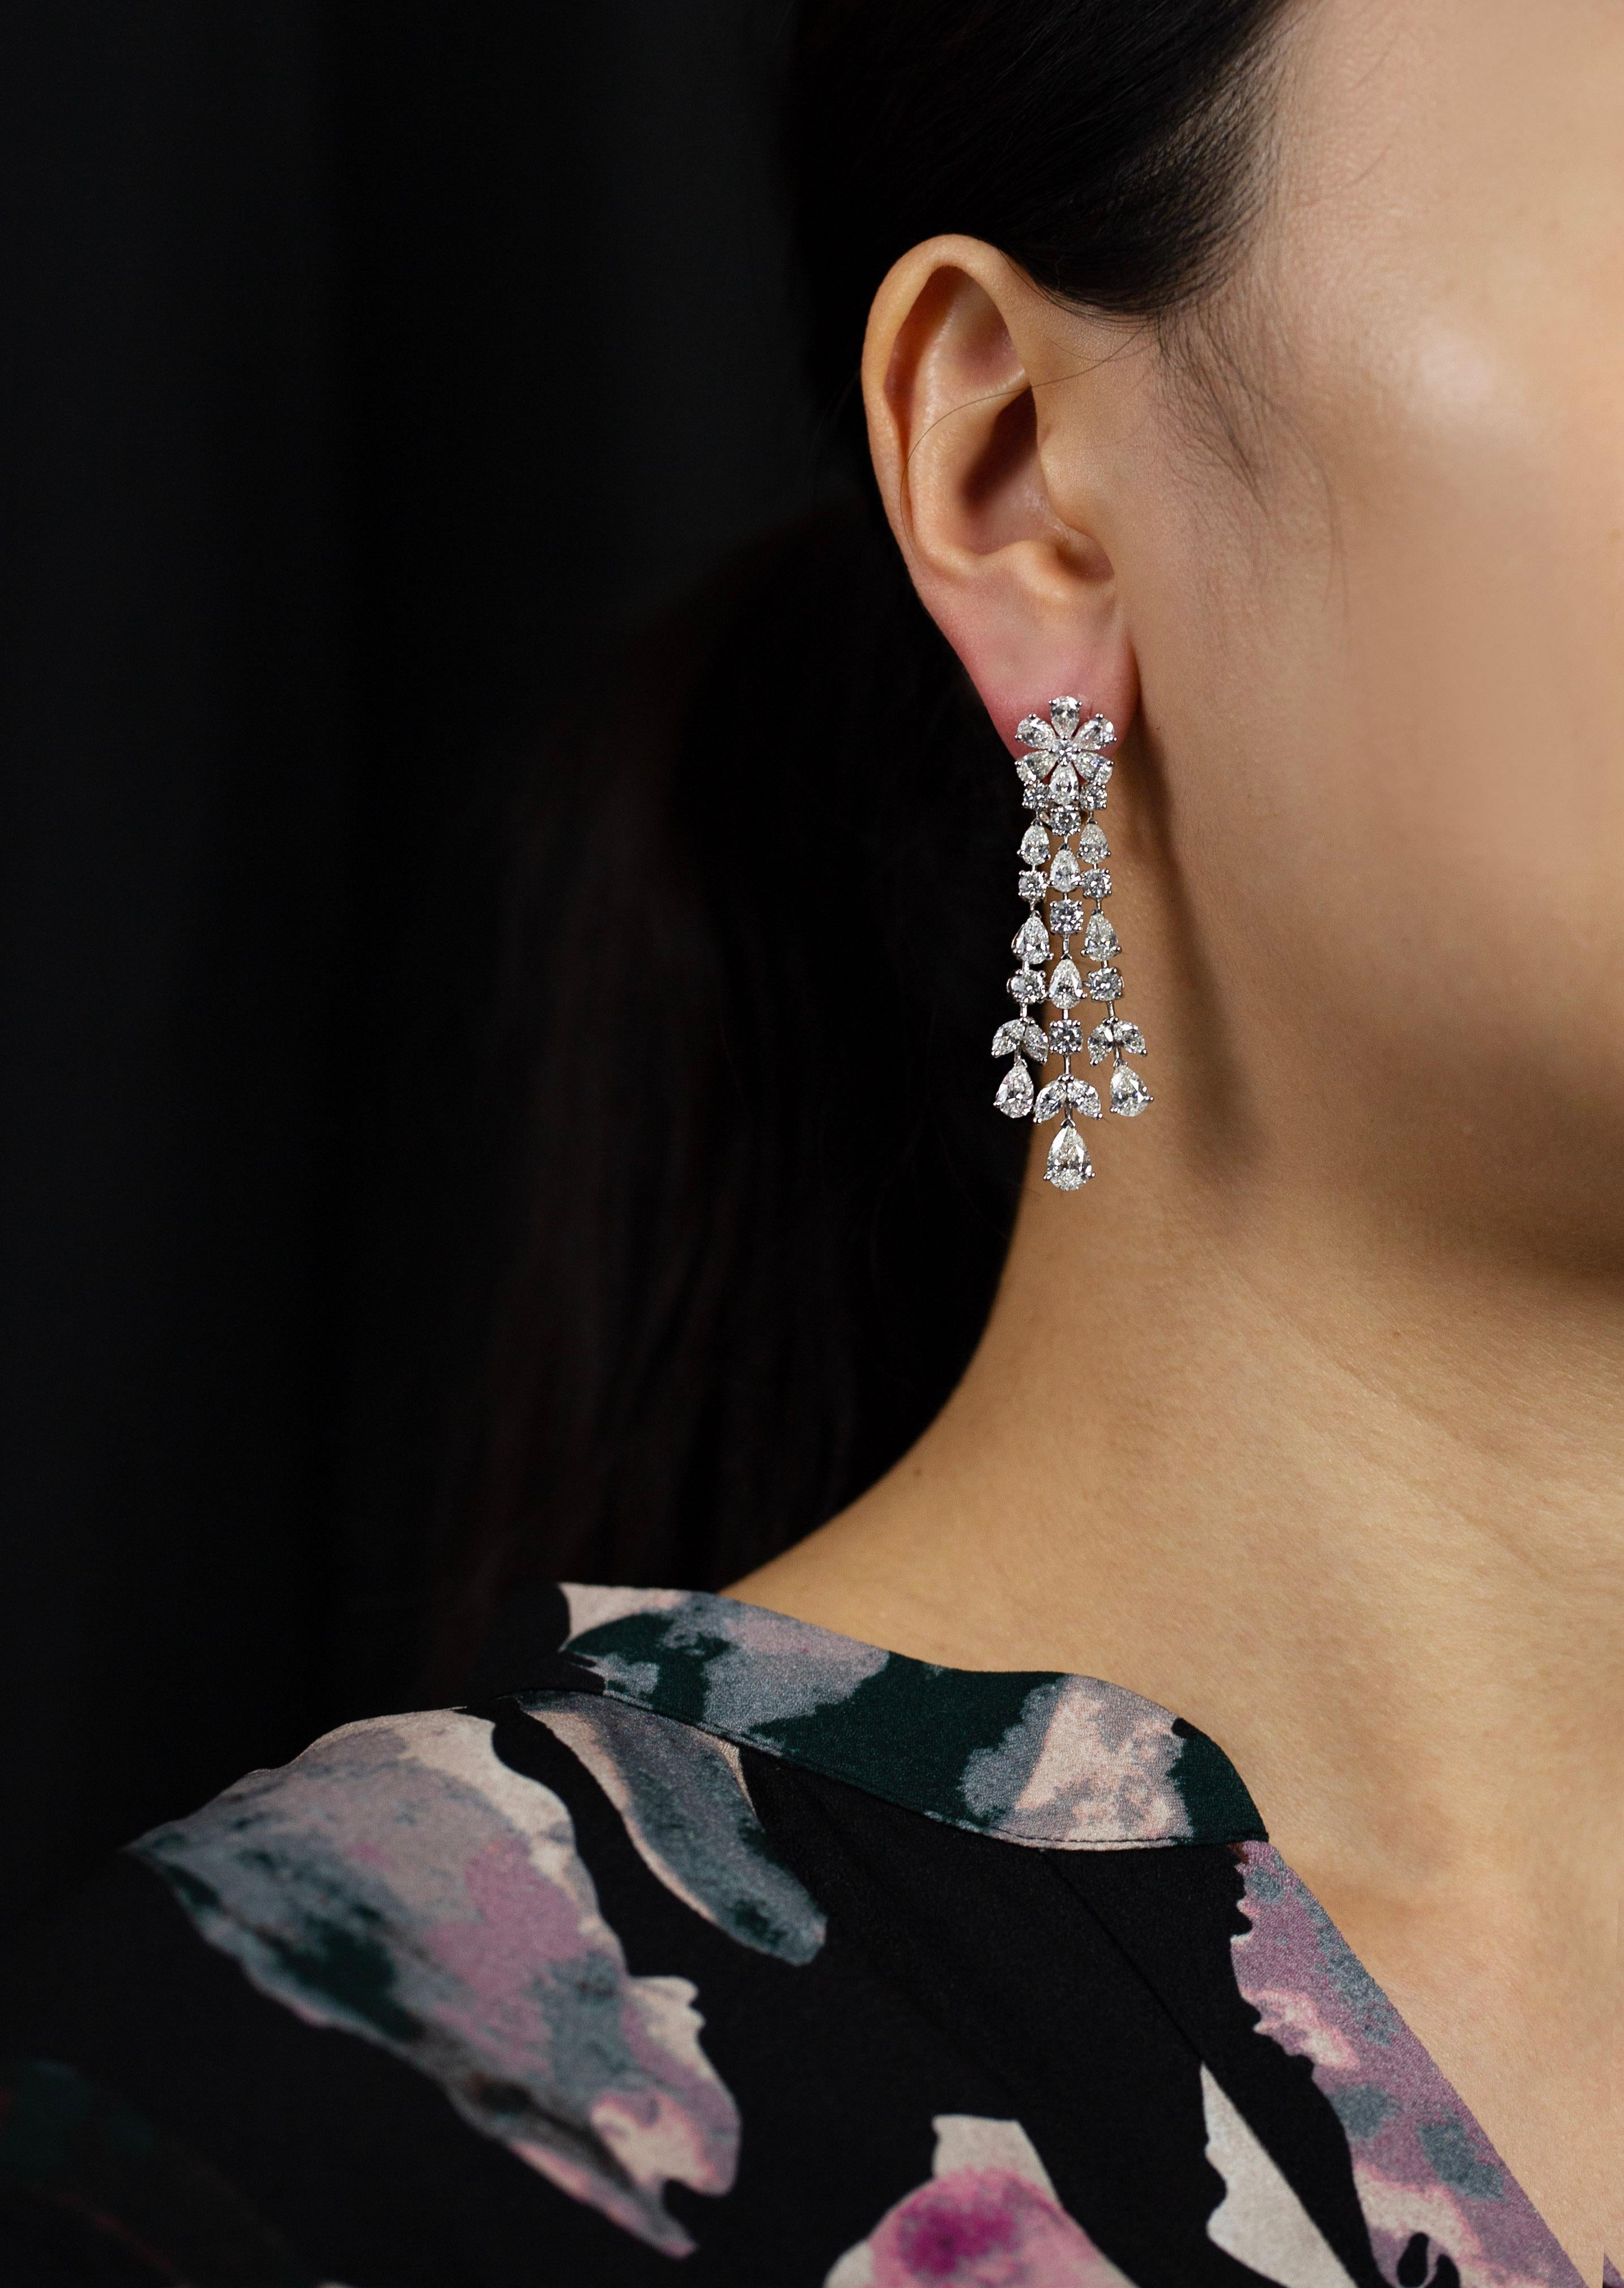 A fashionable and spectacular chandelier earrings showcasing three rows of mixed cut diamonds, set in a elegant waterfall floral-motif design weighing 12.45 carats total. Omega Clip with post and Finely Made in 18k white gold. 

Style available in